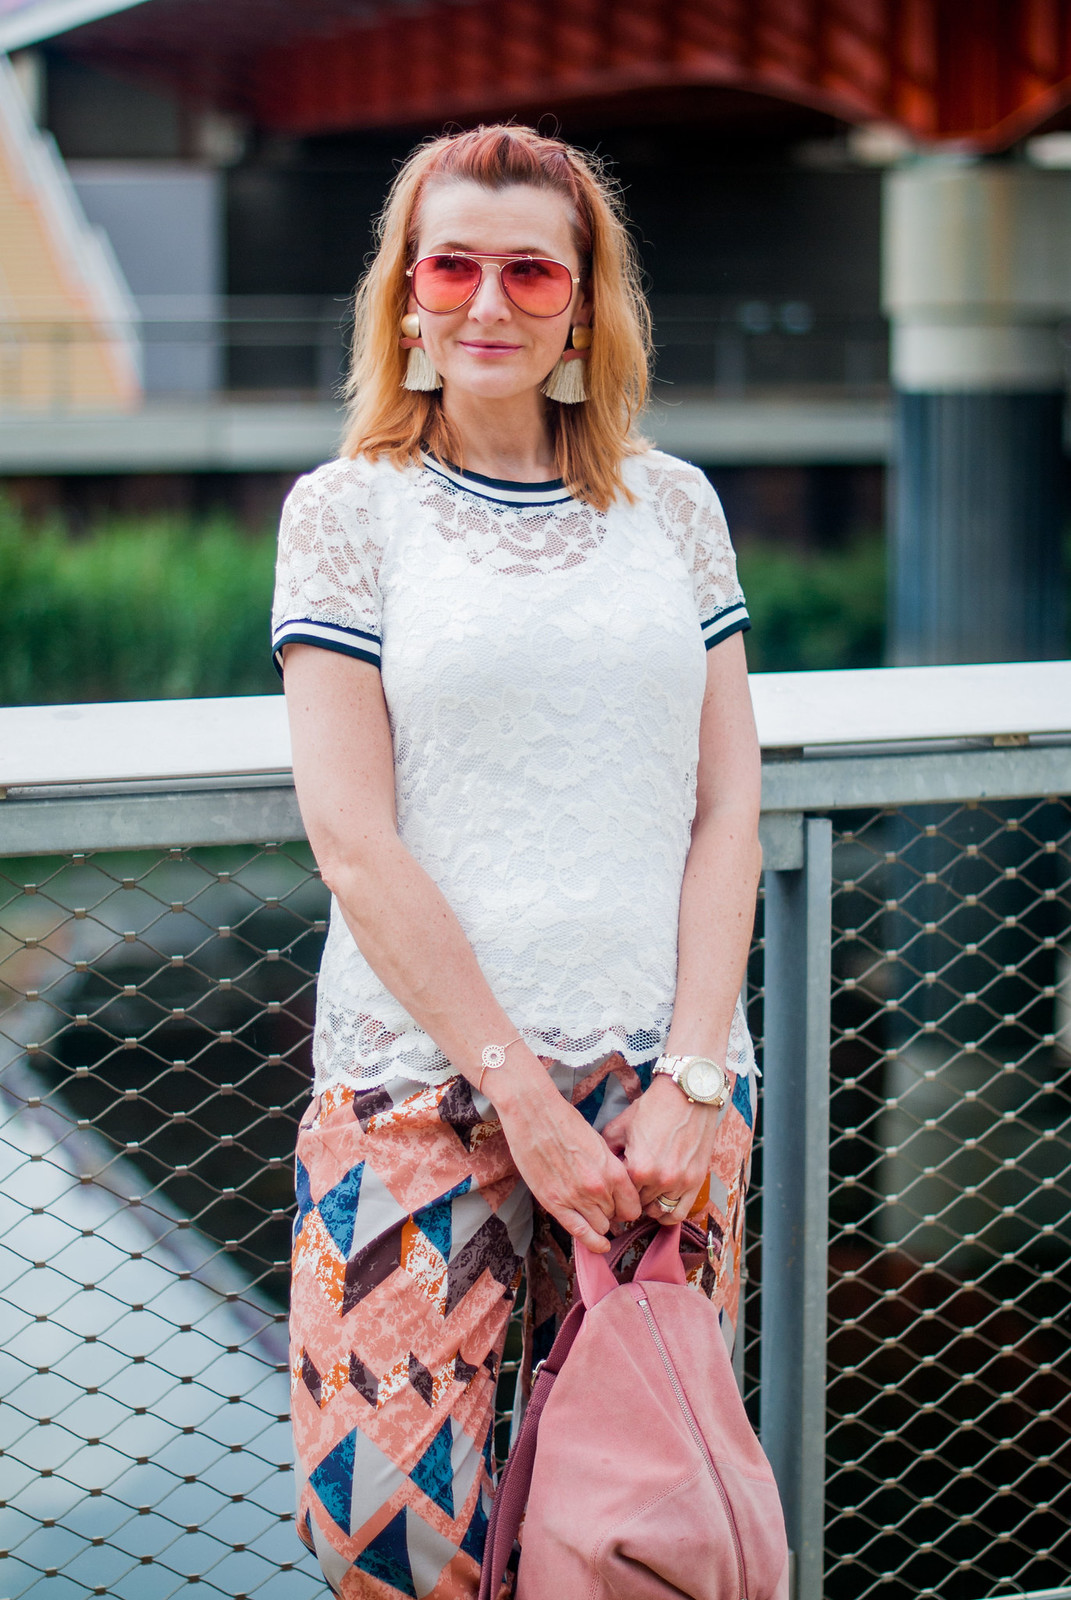 Bold, colourful summer dressing: White lace top pyjama-style patterned trousers pants white Stan Smiths statement tassel earrings orange aviators pink suede backpack | Not Dressed As Lamb, over 40 style blog